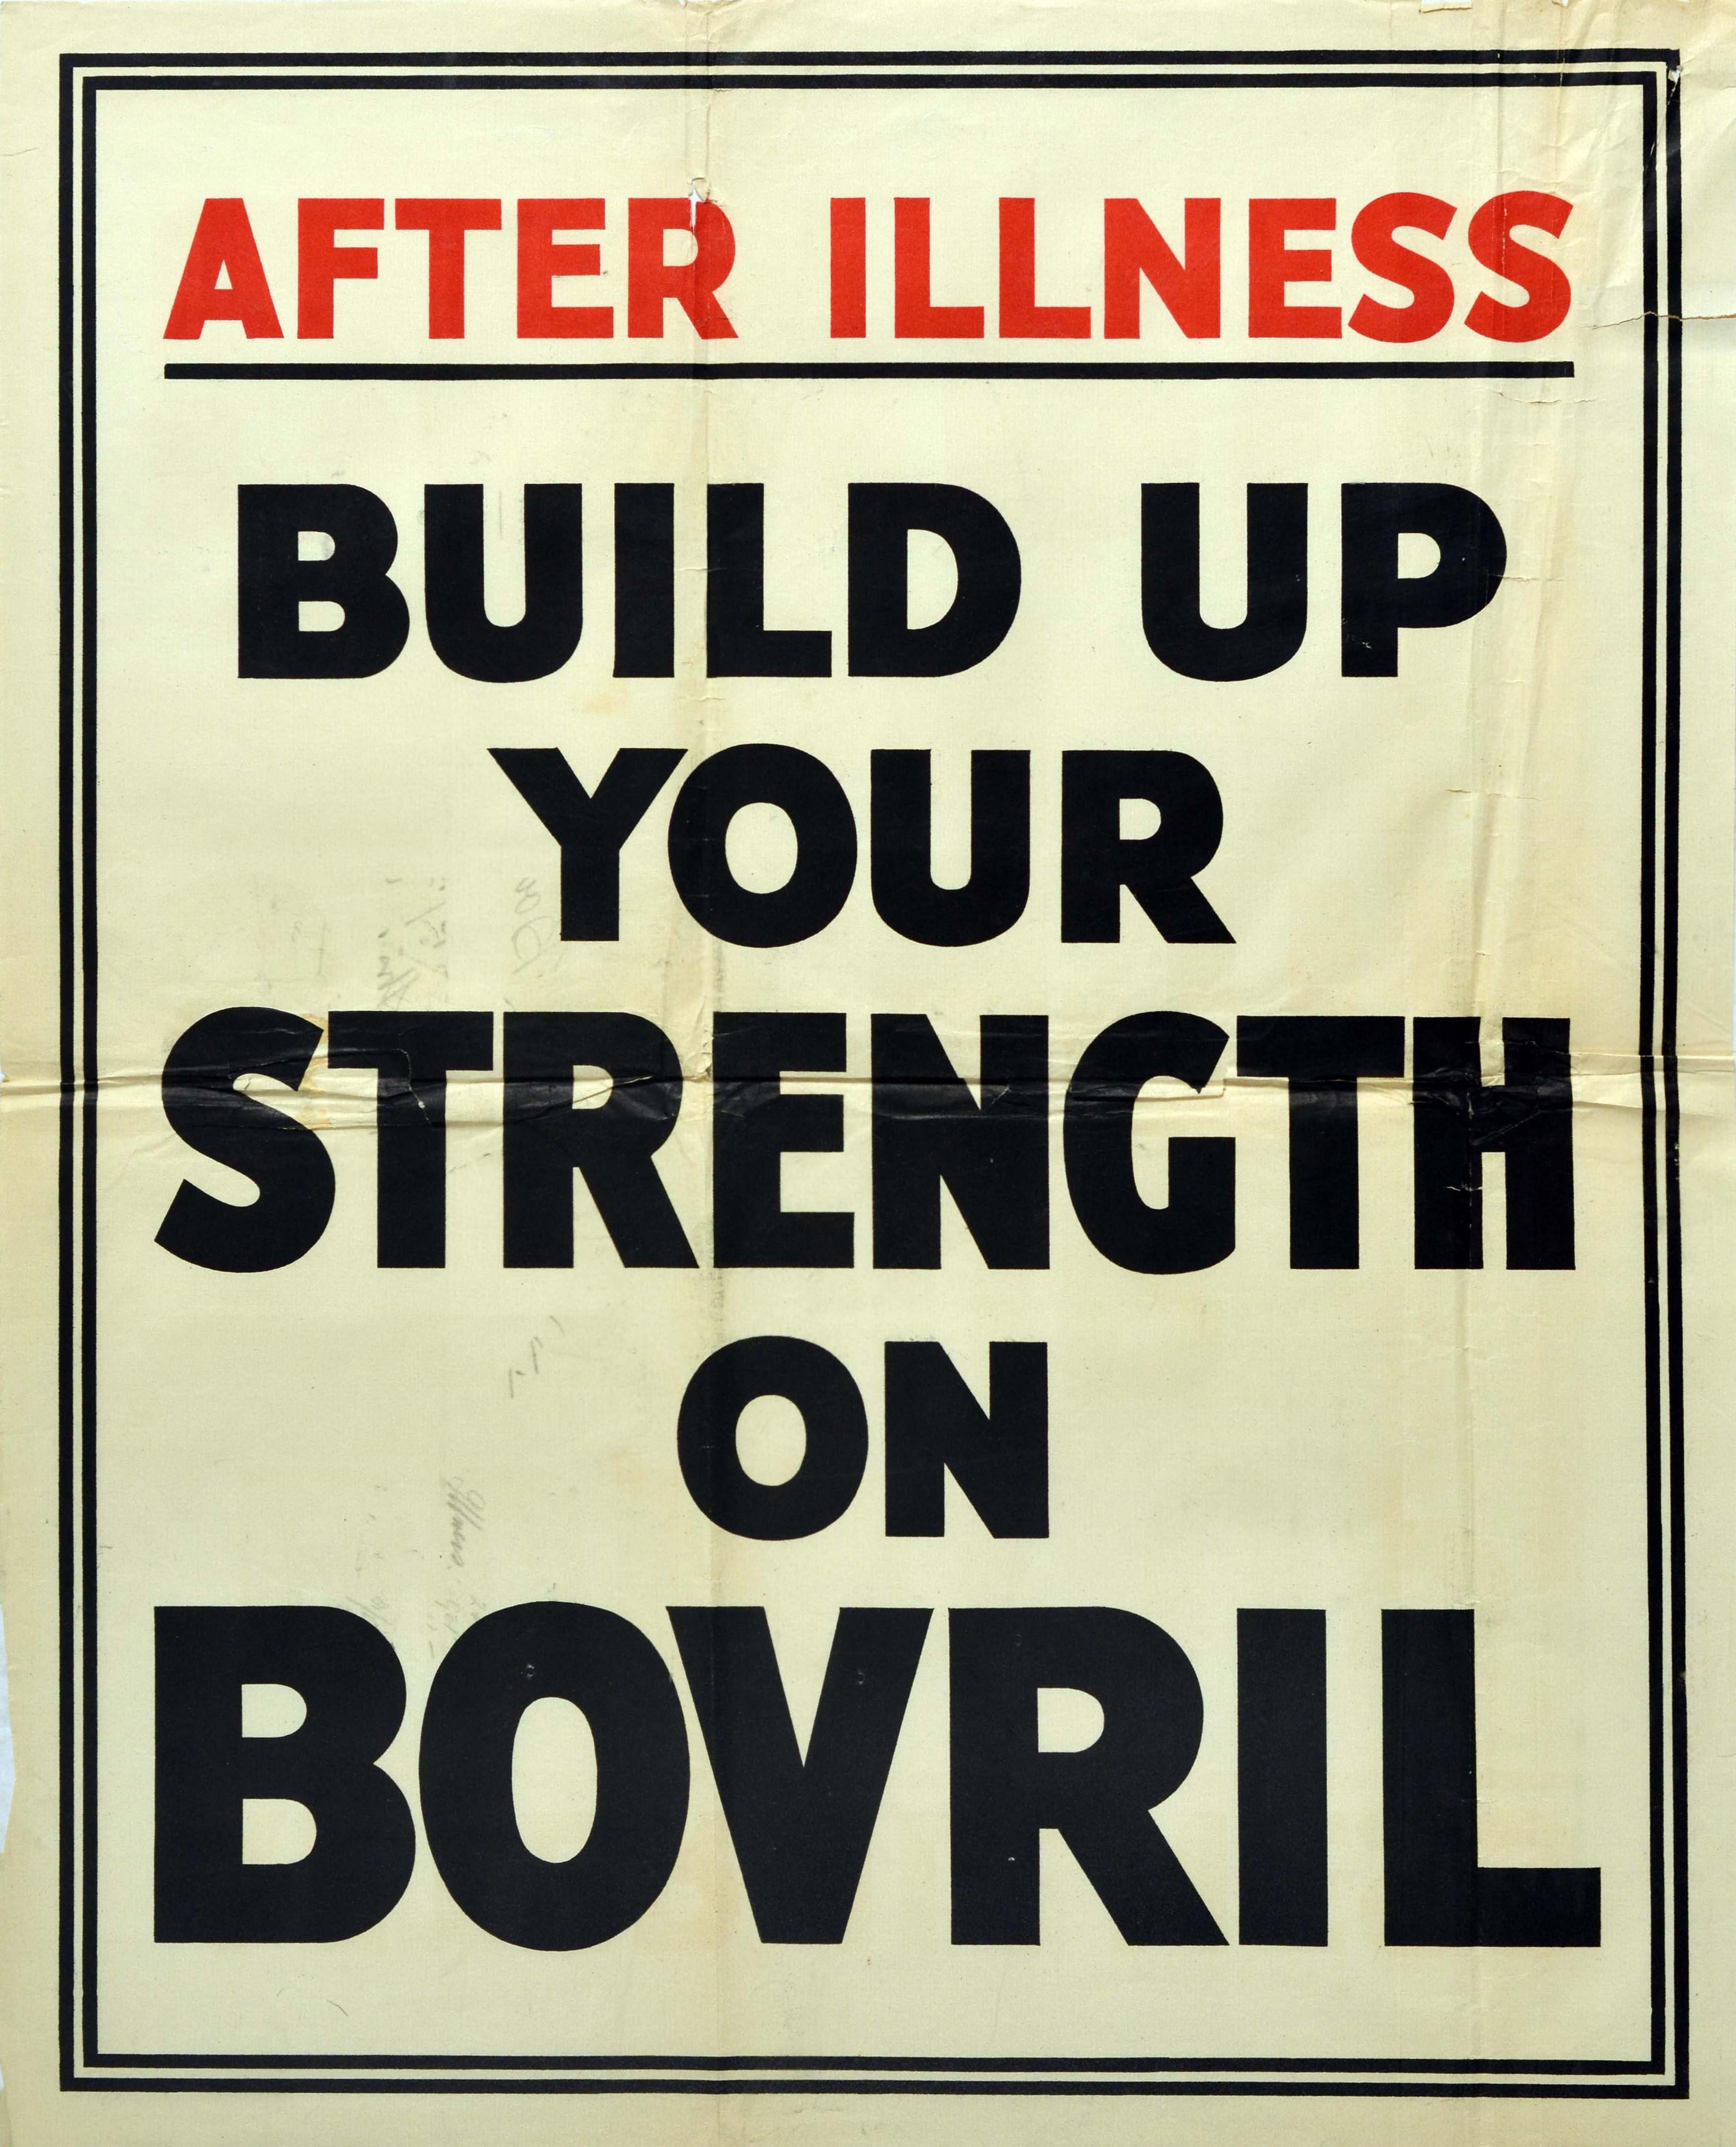 Original vintage food advertising poster for Bovril - After illness build up your strength on Bovril - featuring bold black and red lettering on a white background with a black double line frame border. Printed in Britain in the 1930s, this campaign